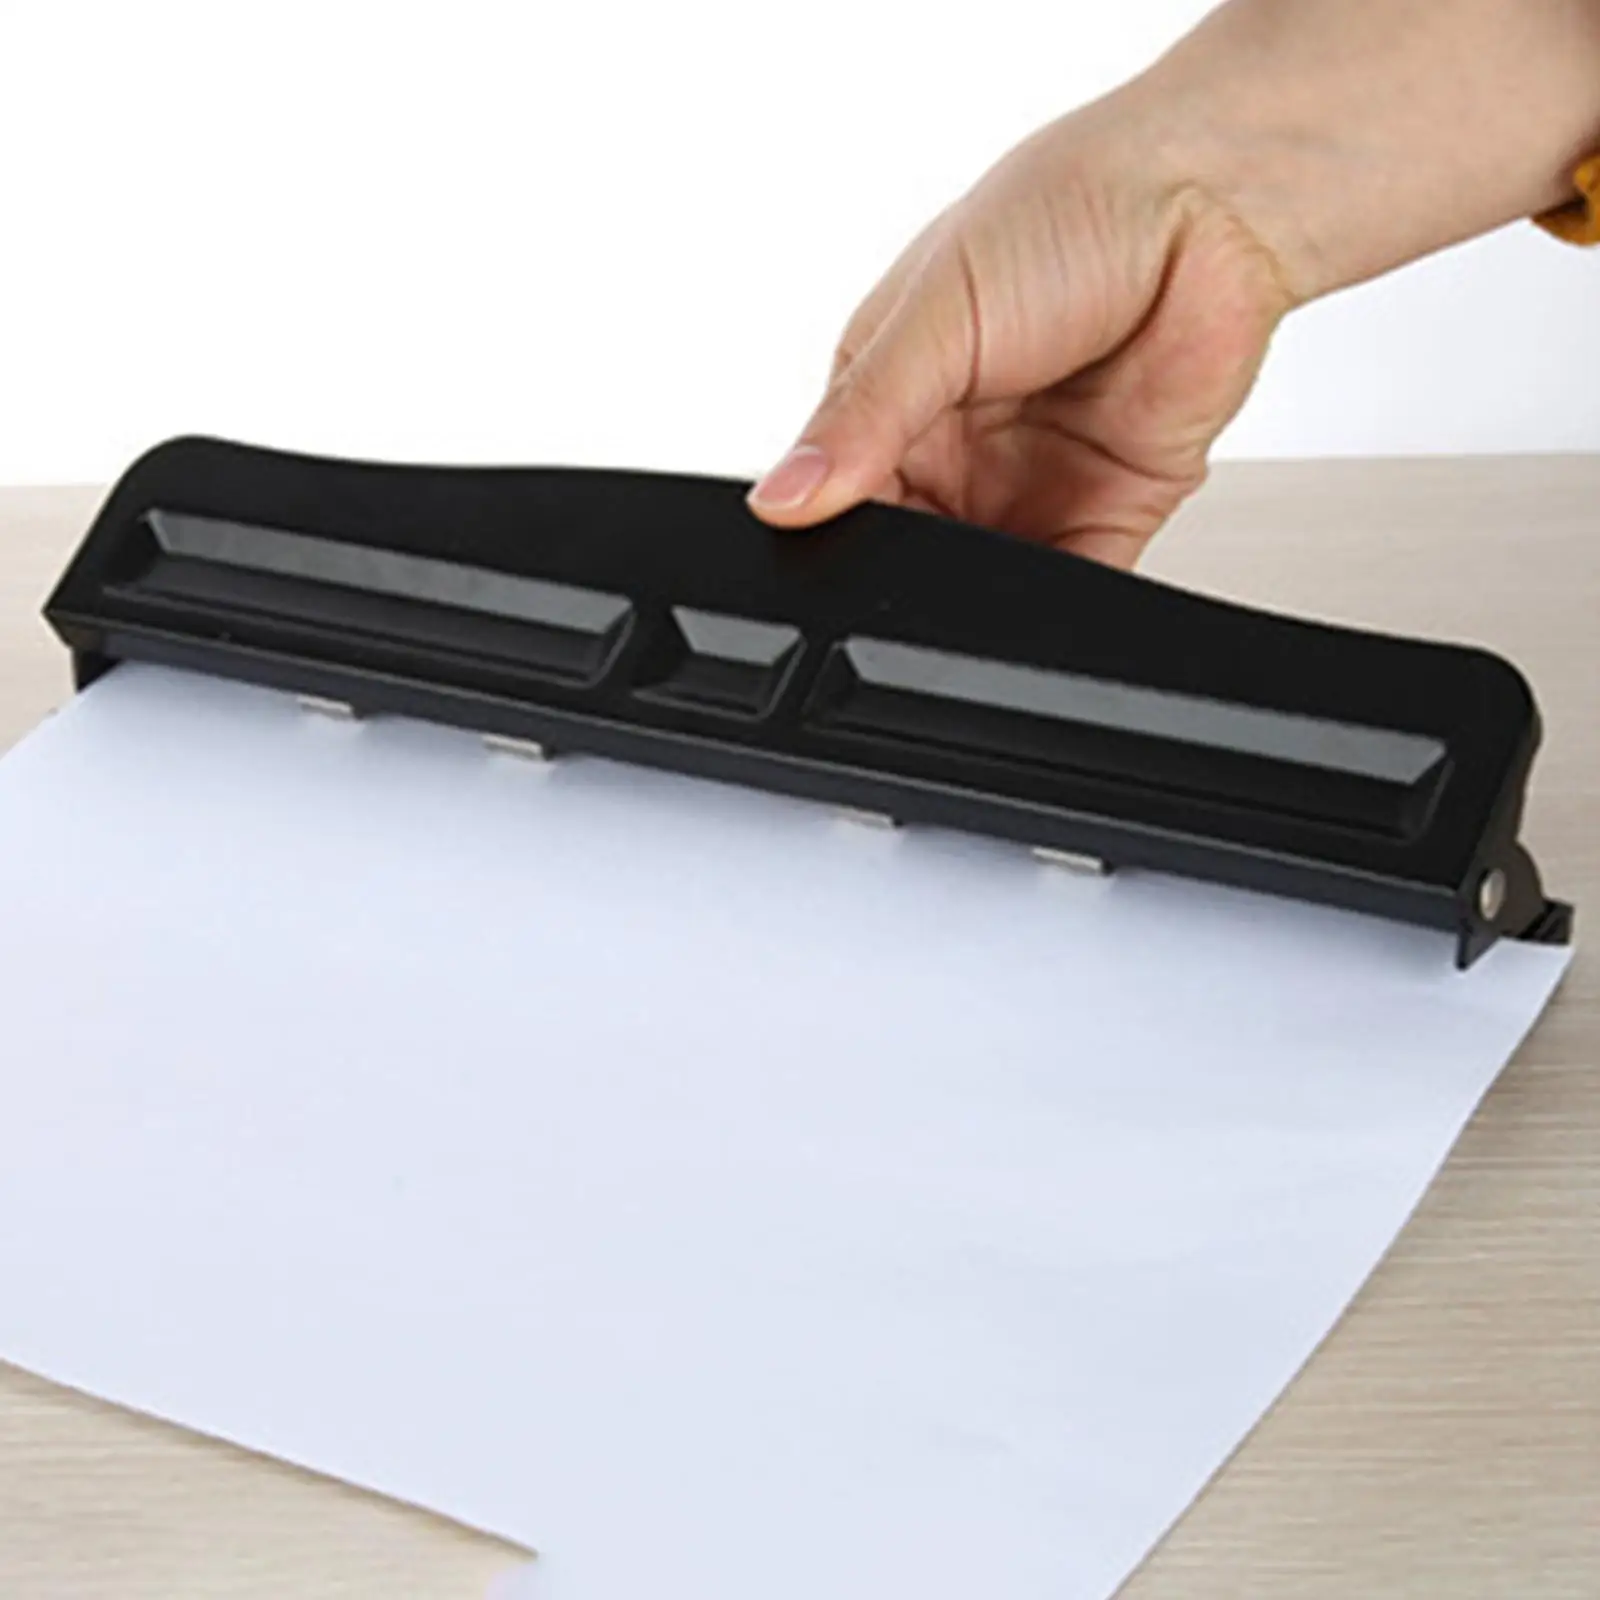 3 Hole Punch 12 Sheet Capacity Metal File Binding Portable Desktop Hole Puncher for Office Learning Classroom Working